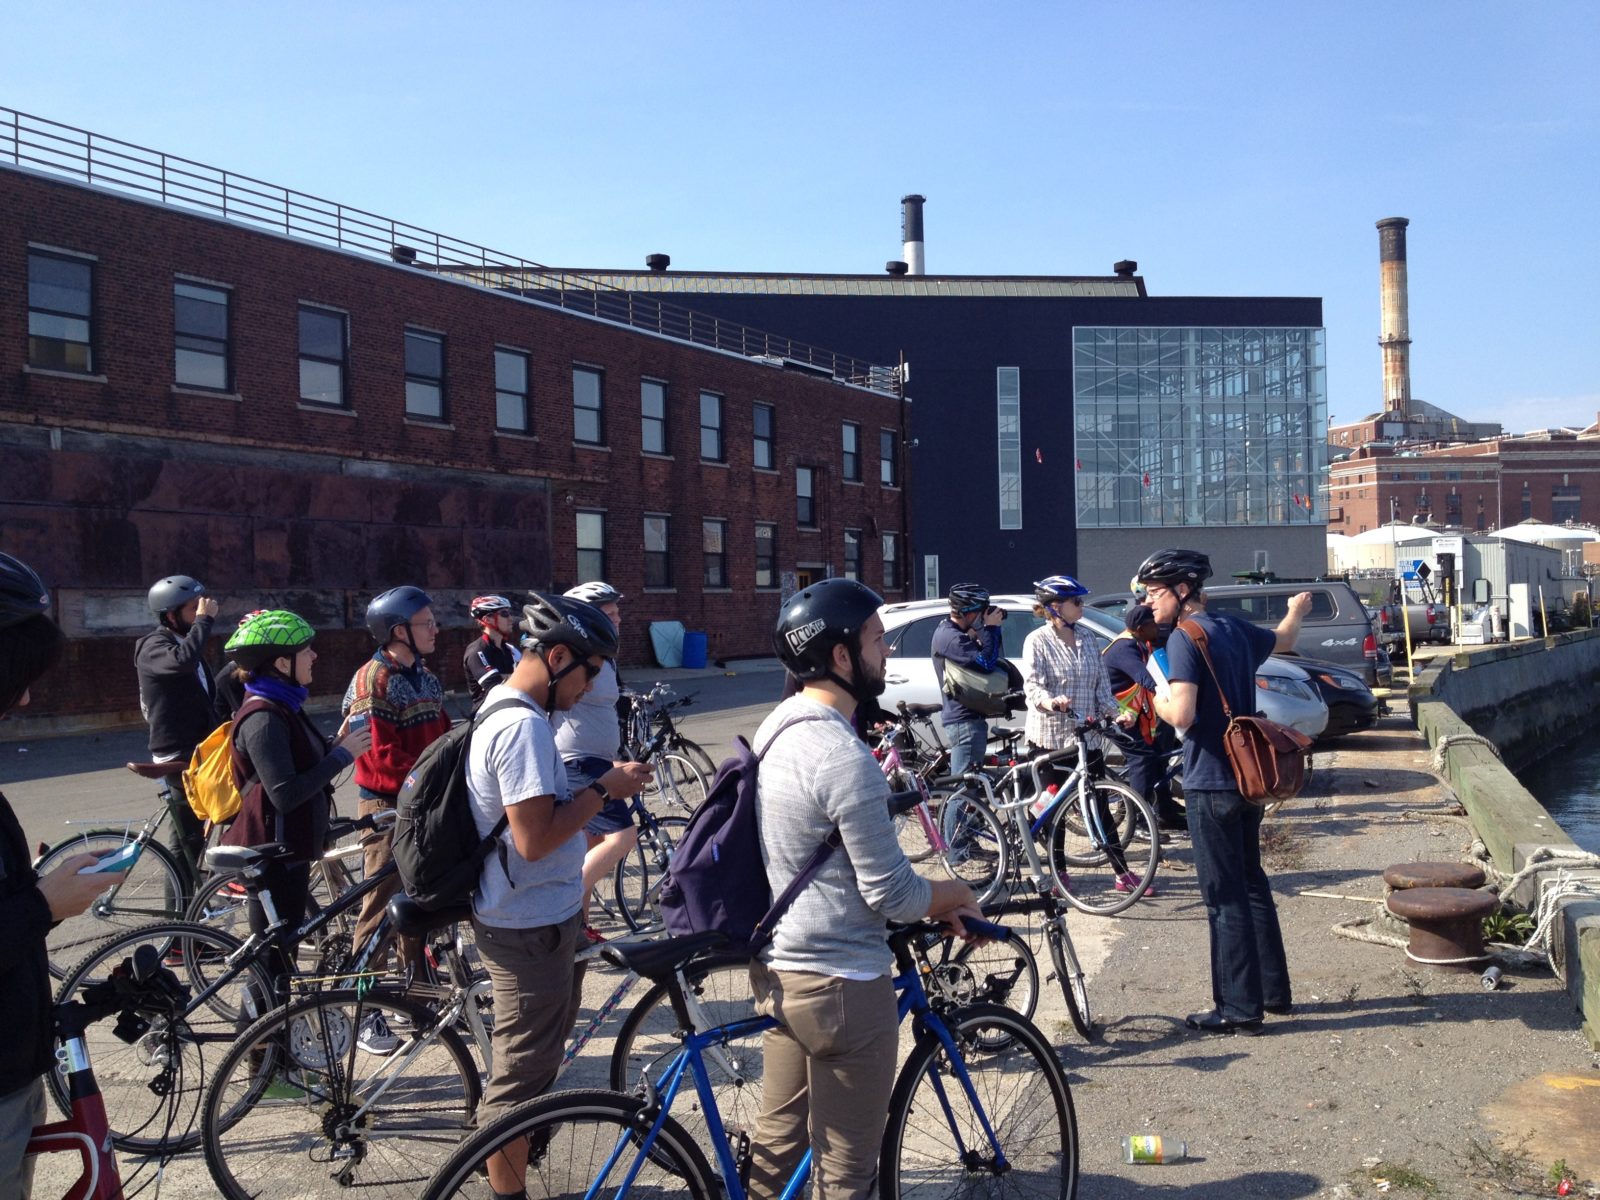 People wearing safety helmets stand with their bicycles at the waterfront by industrial buildings